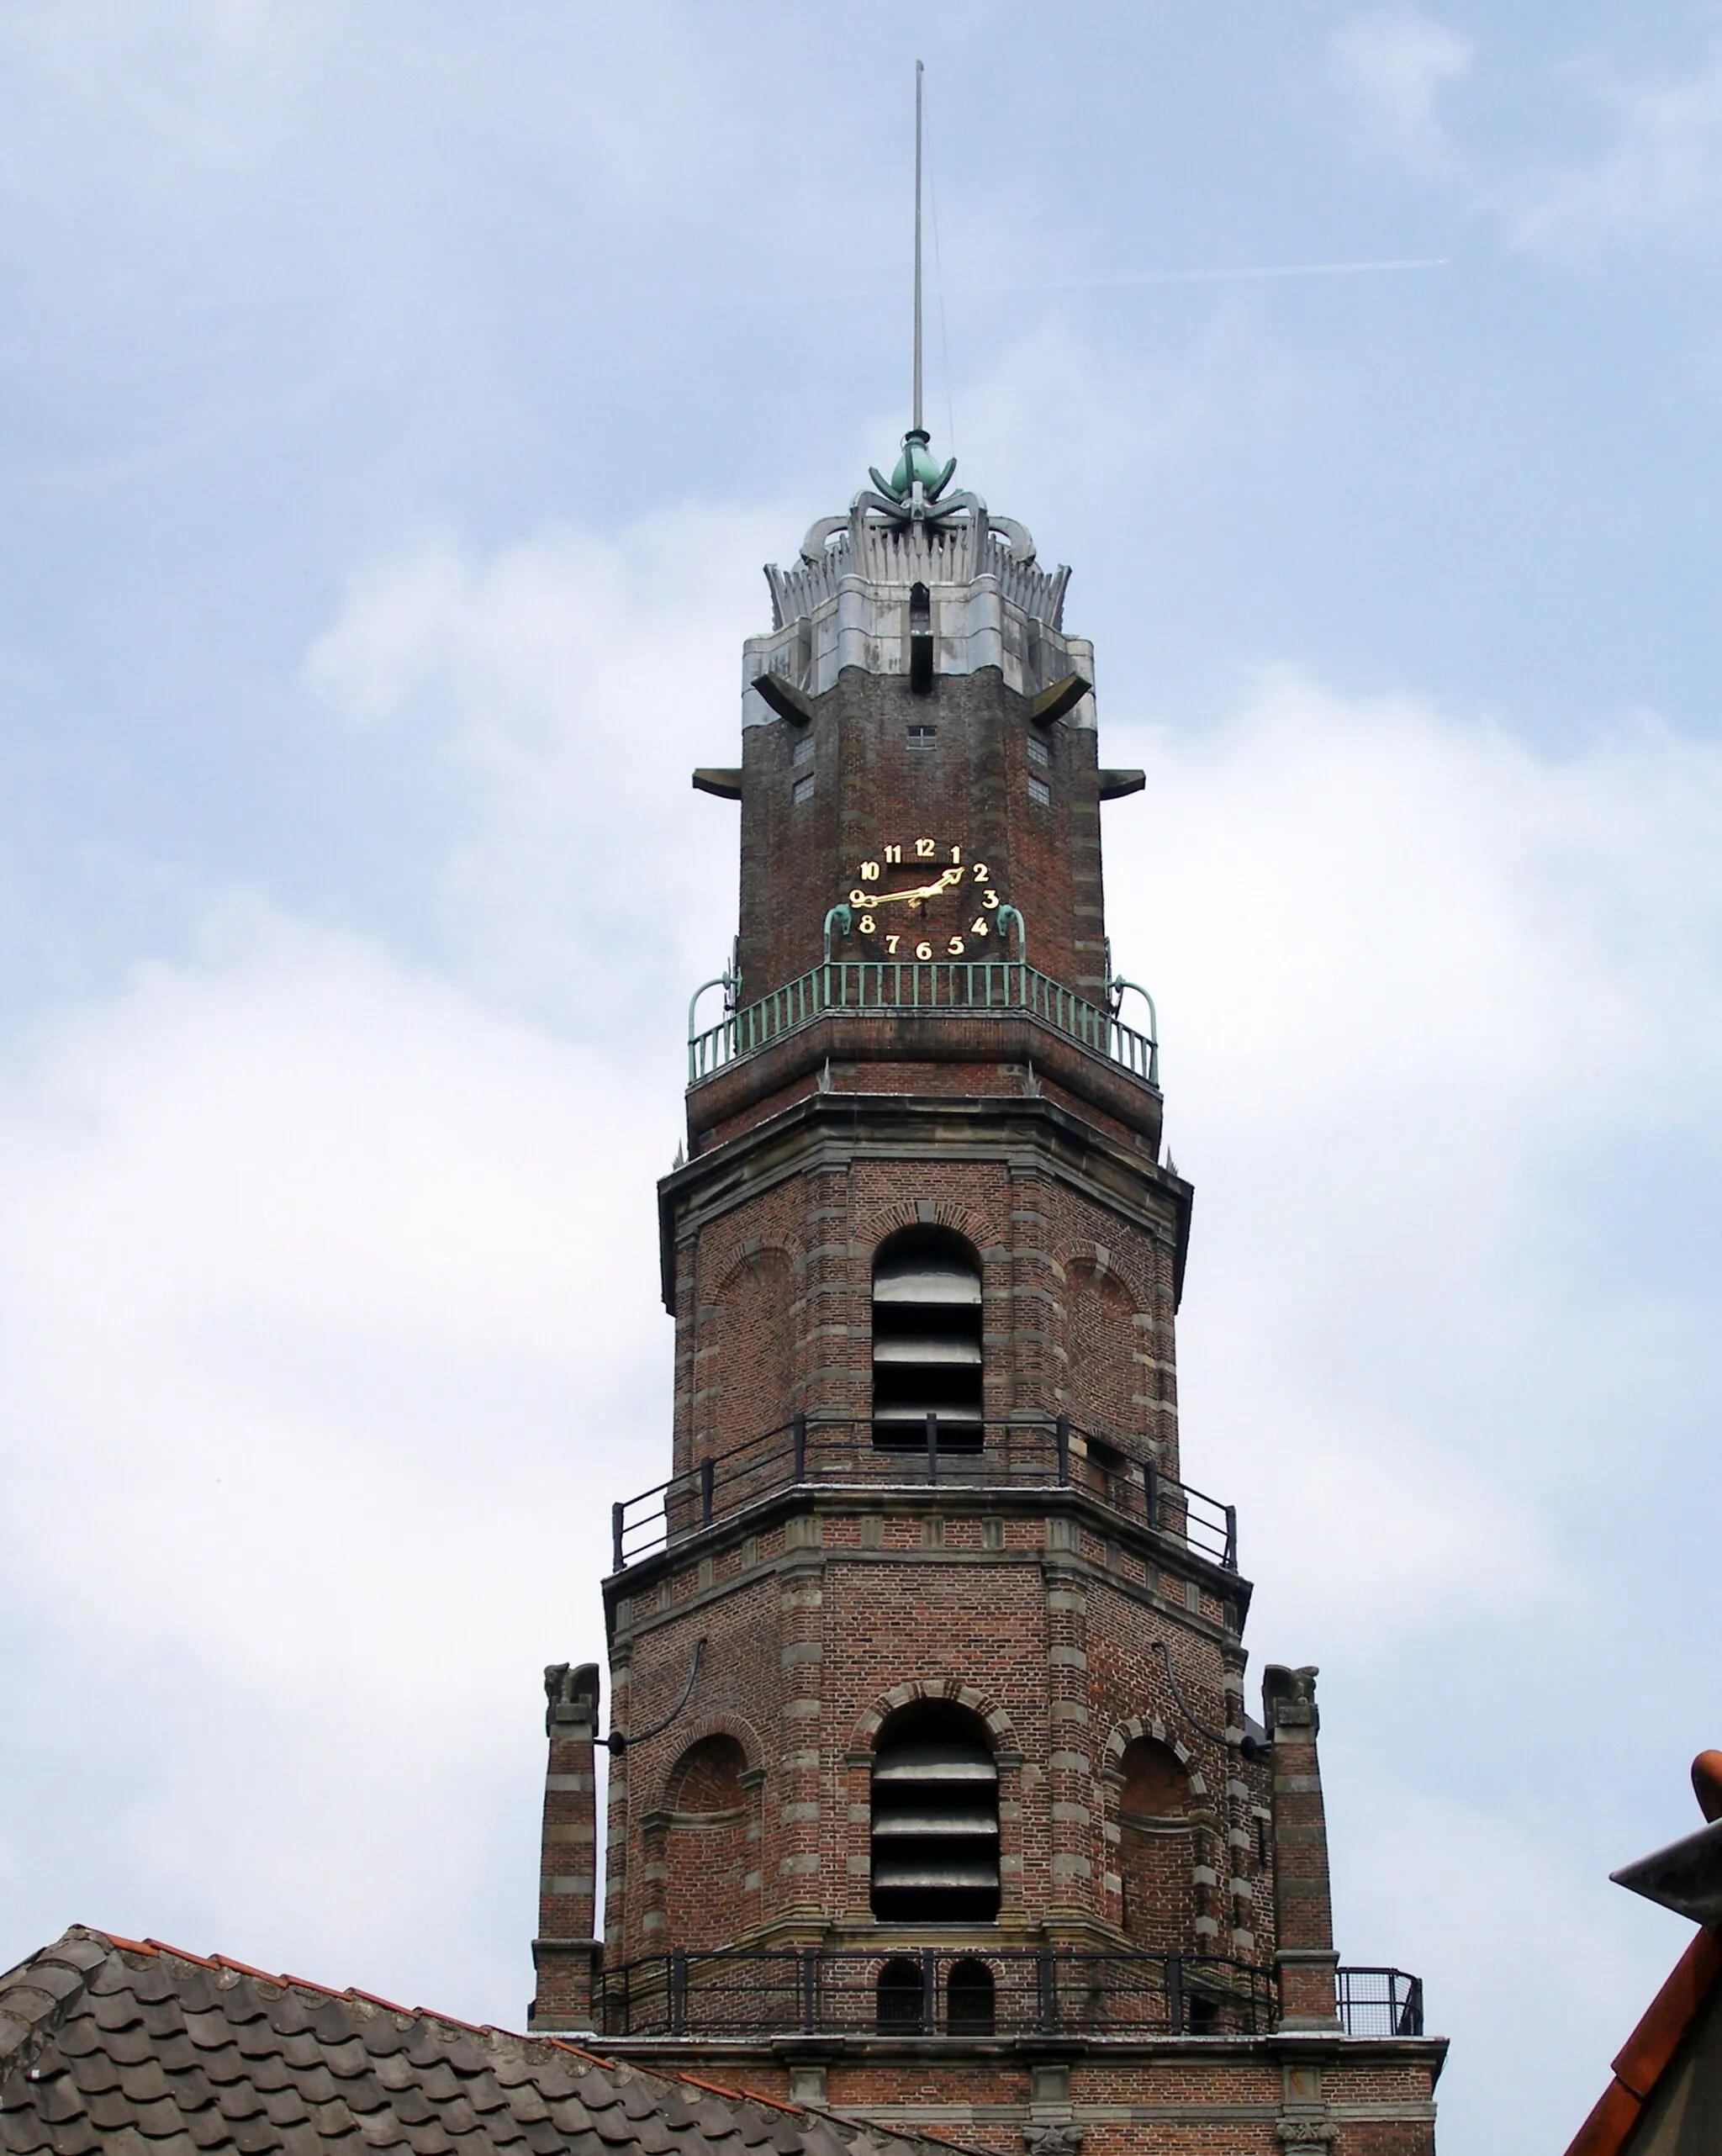 Photo showing: Steeple of the Hervormde Kerk (Dutch Reformed Church) in IJsselstein, the Netherlands. 
The tower was build about 1535 and was reconstructed several times. In 1911 the church and the tower were heavily damaged by fire.

Hence the steeple was replaced in 1921-1923 by a new one in Amsterdams School style, as pictured.